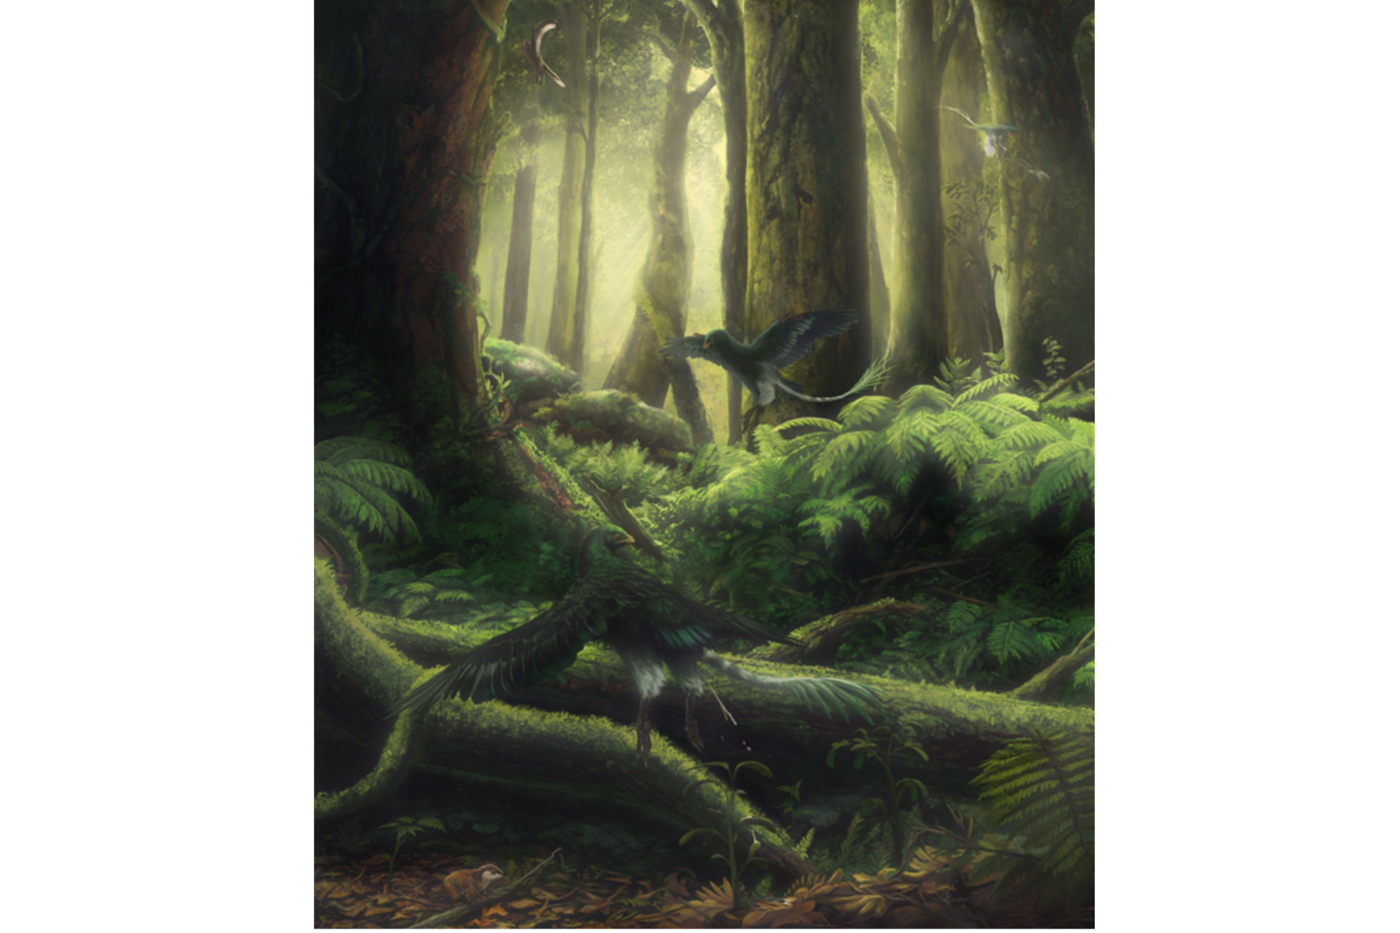 An artists' rendering of a Jeholornis bird in a Cretaceous forest, pooping out seeds.